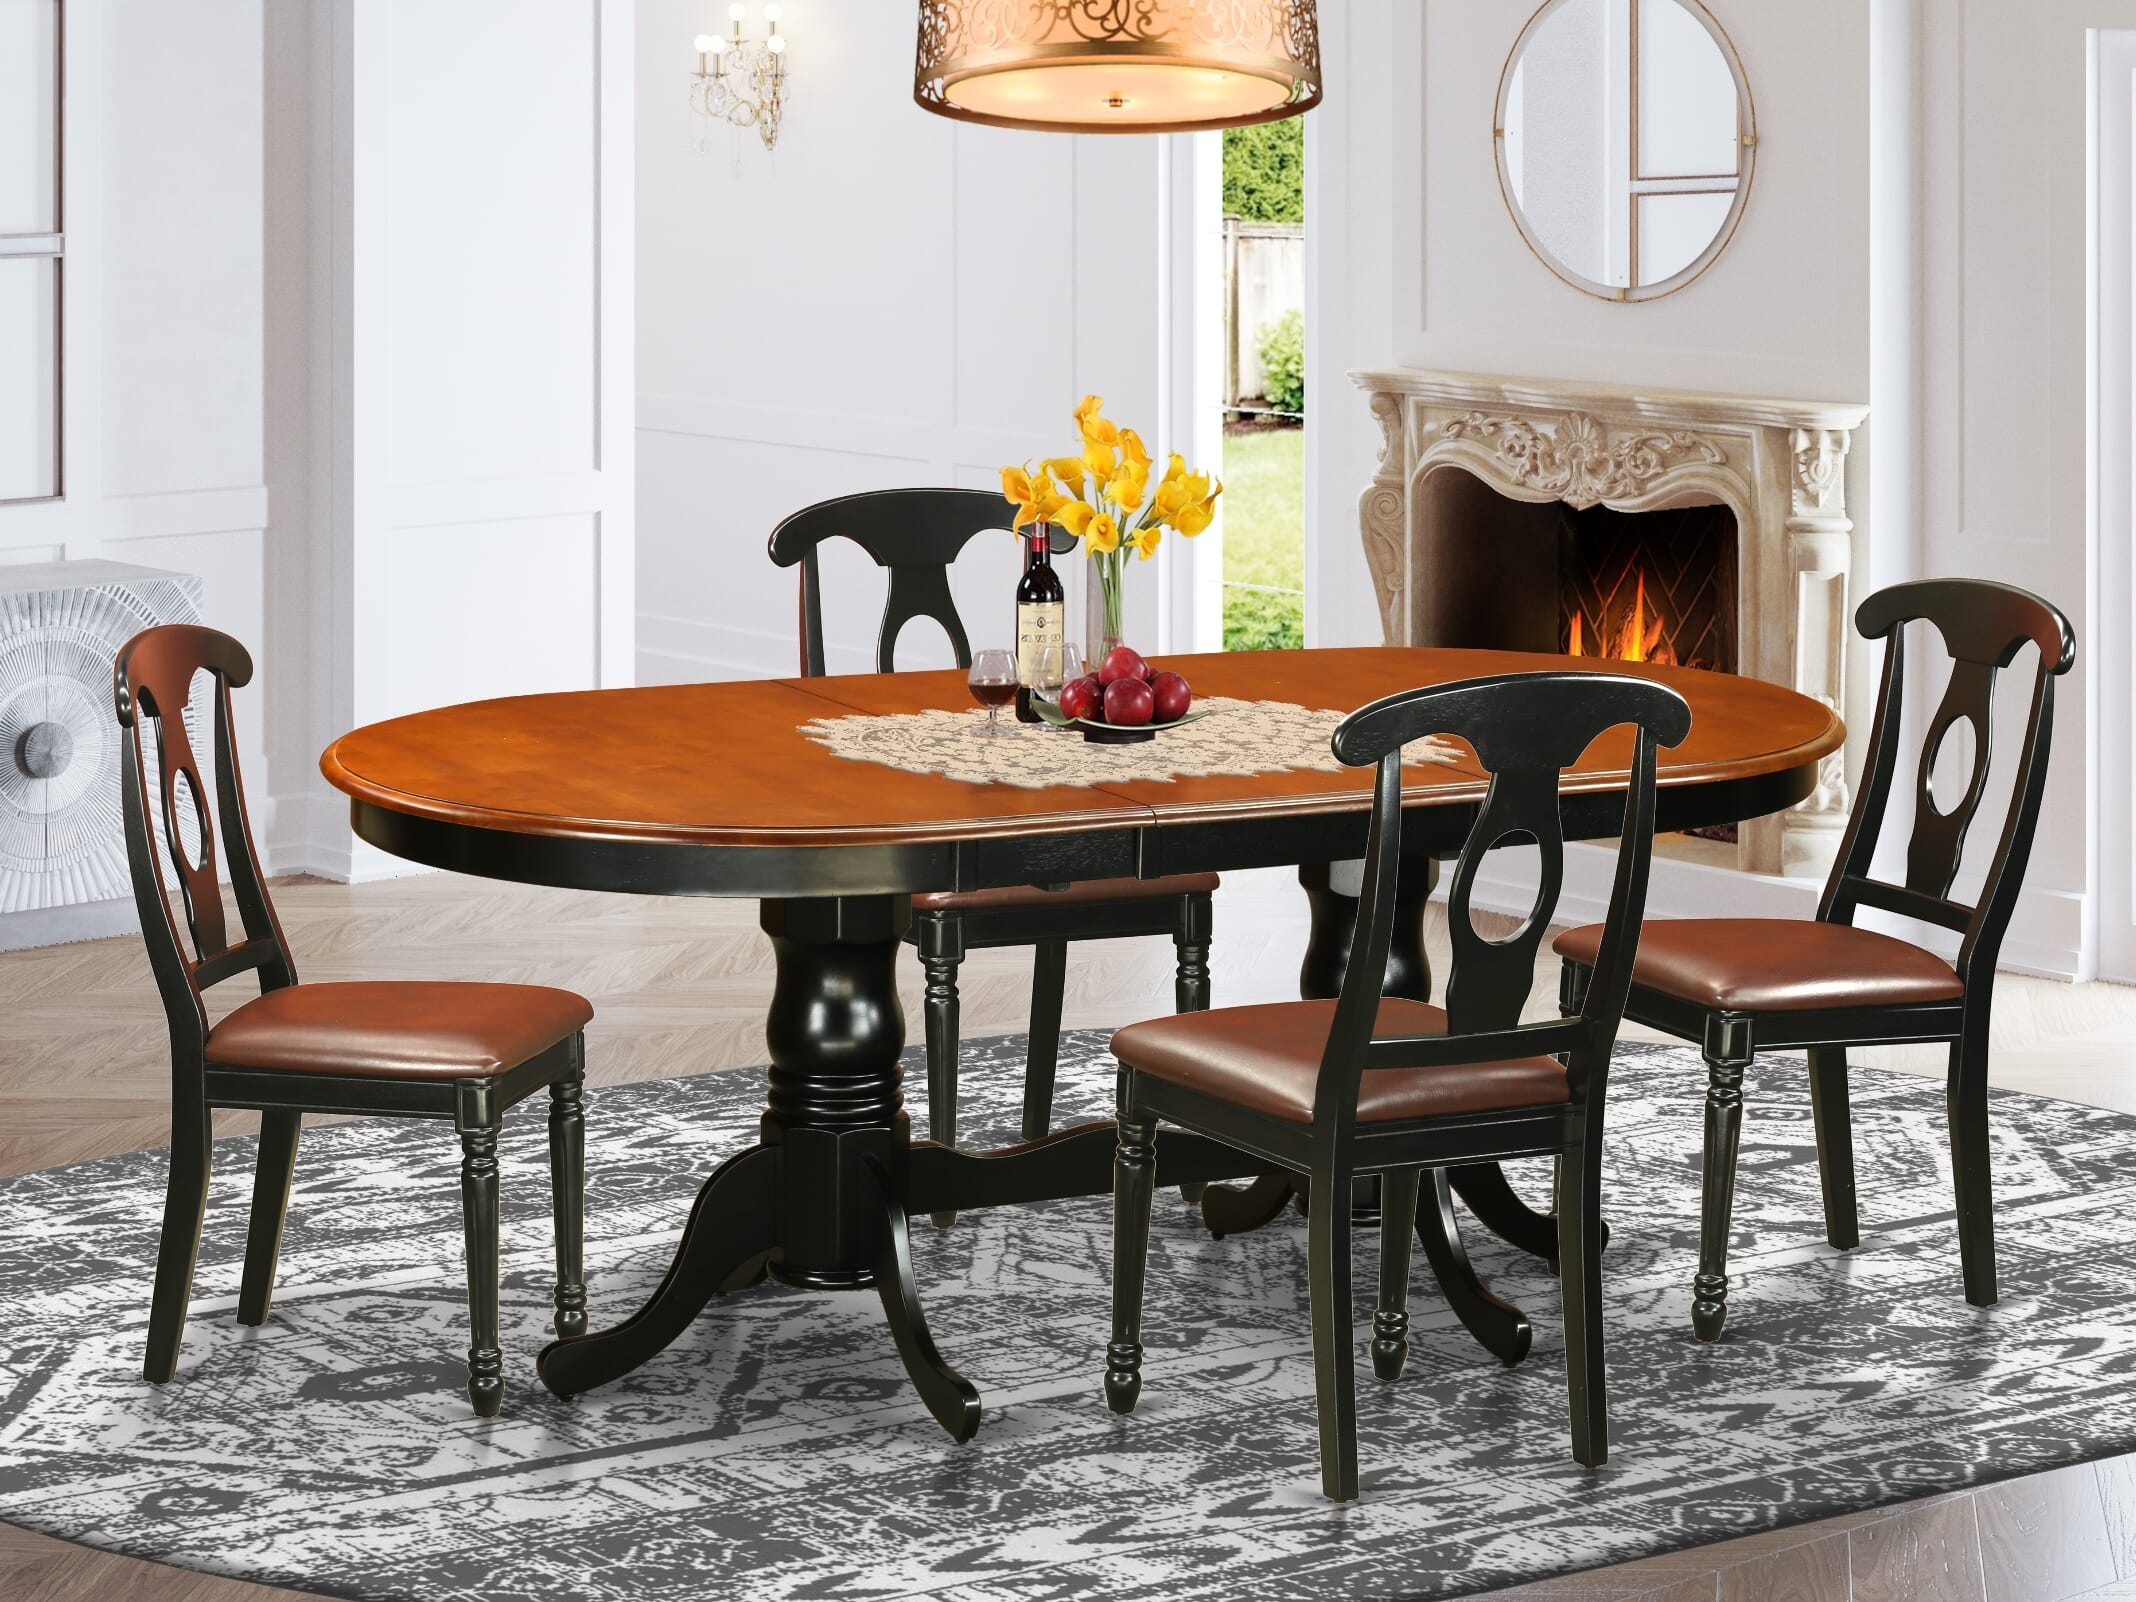 5 Pc Oval Dining room Table with Leaf and Leatherette Seat Chairs in Black / Cherry